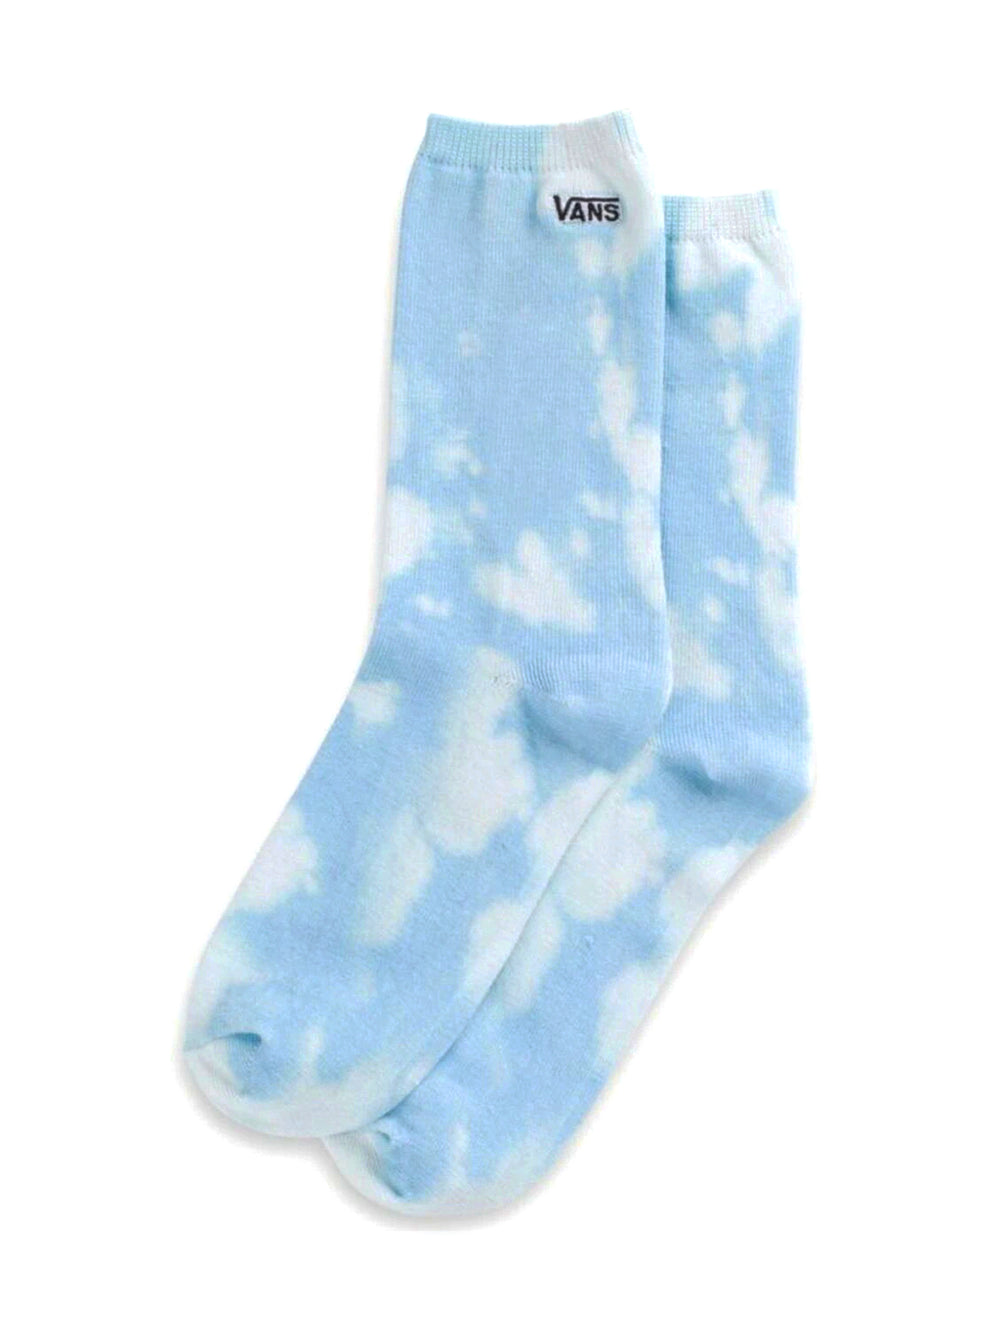 VANS COVERED SOCK  - CLEARANCE